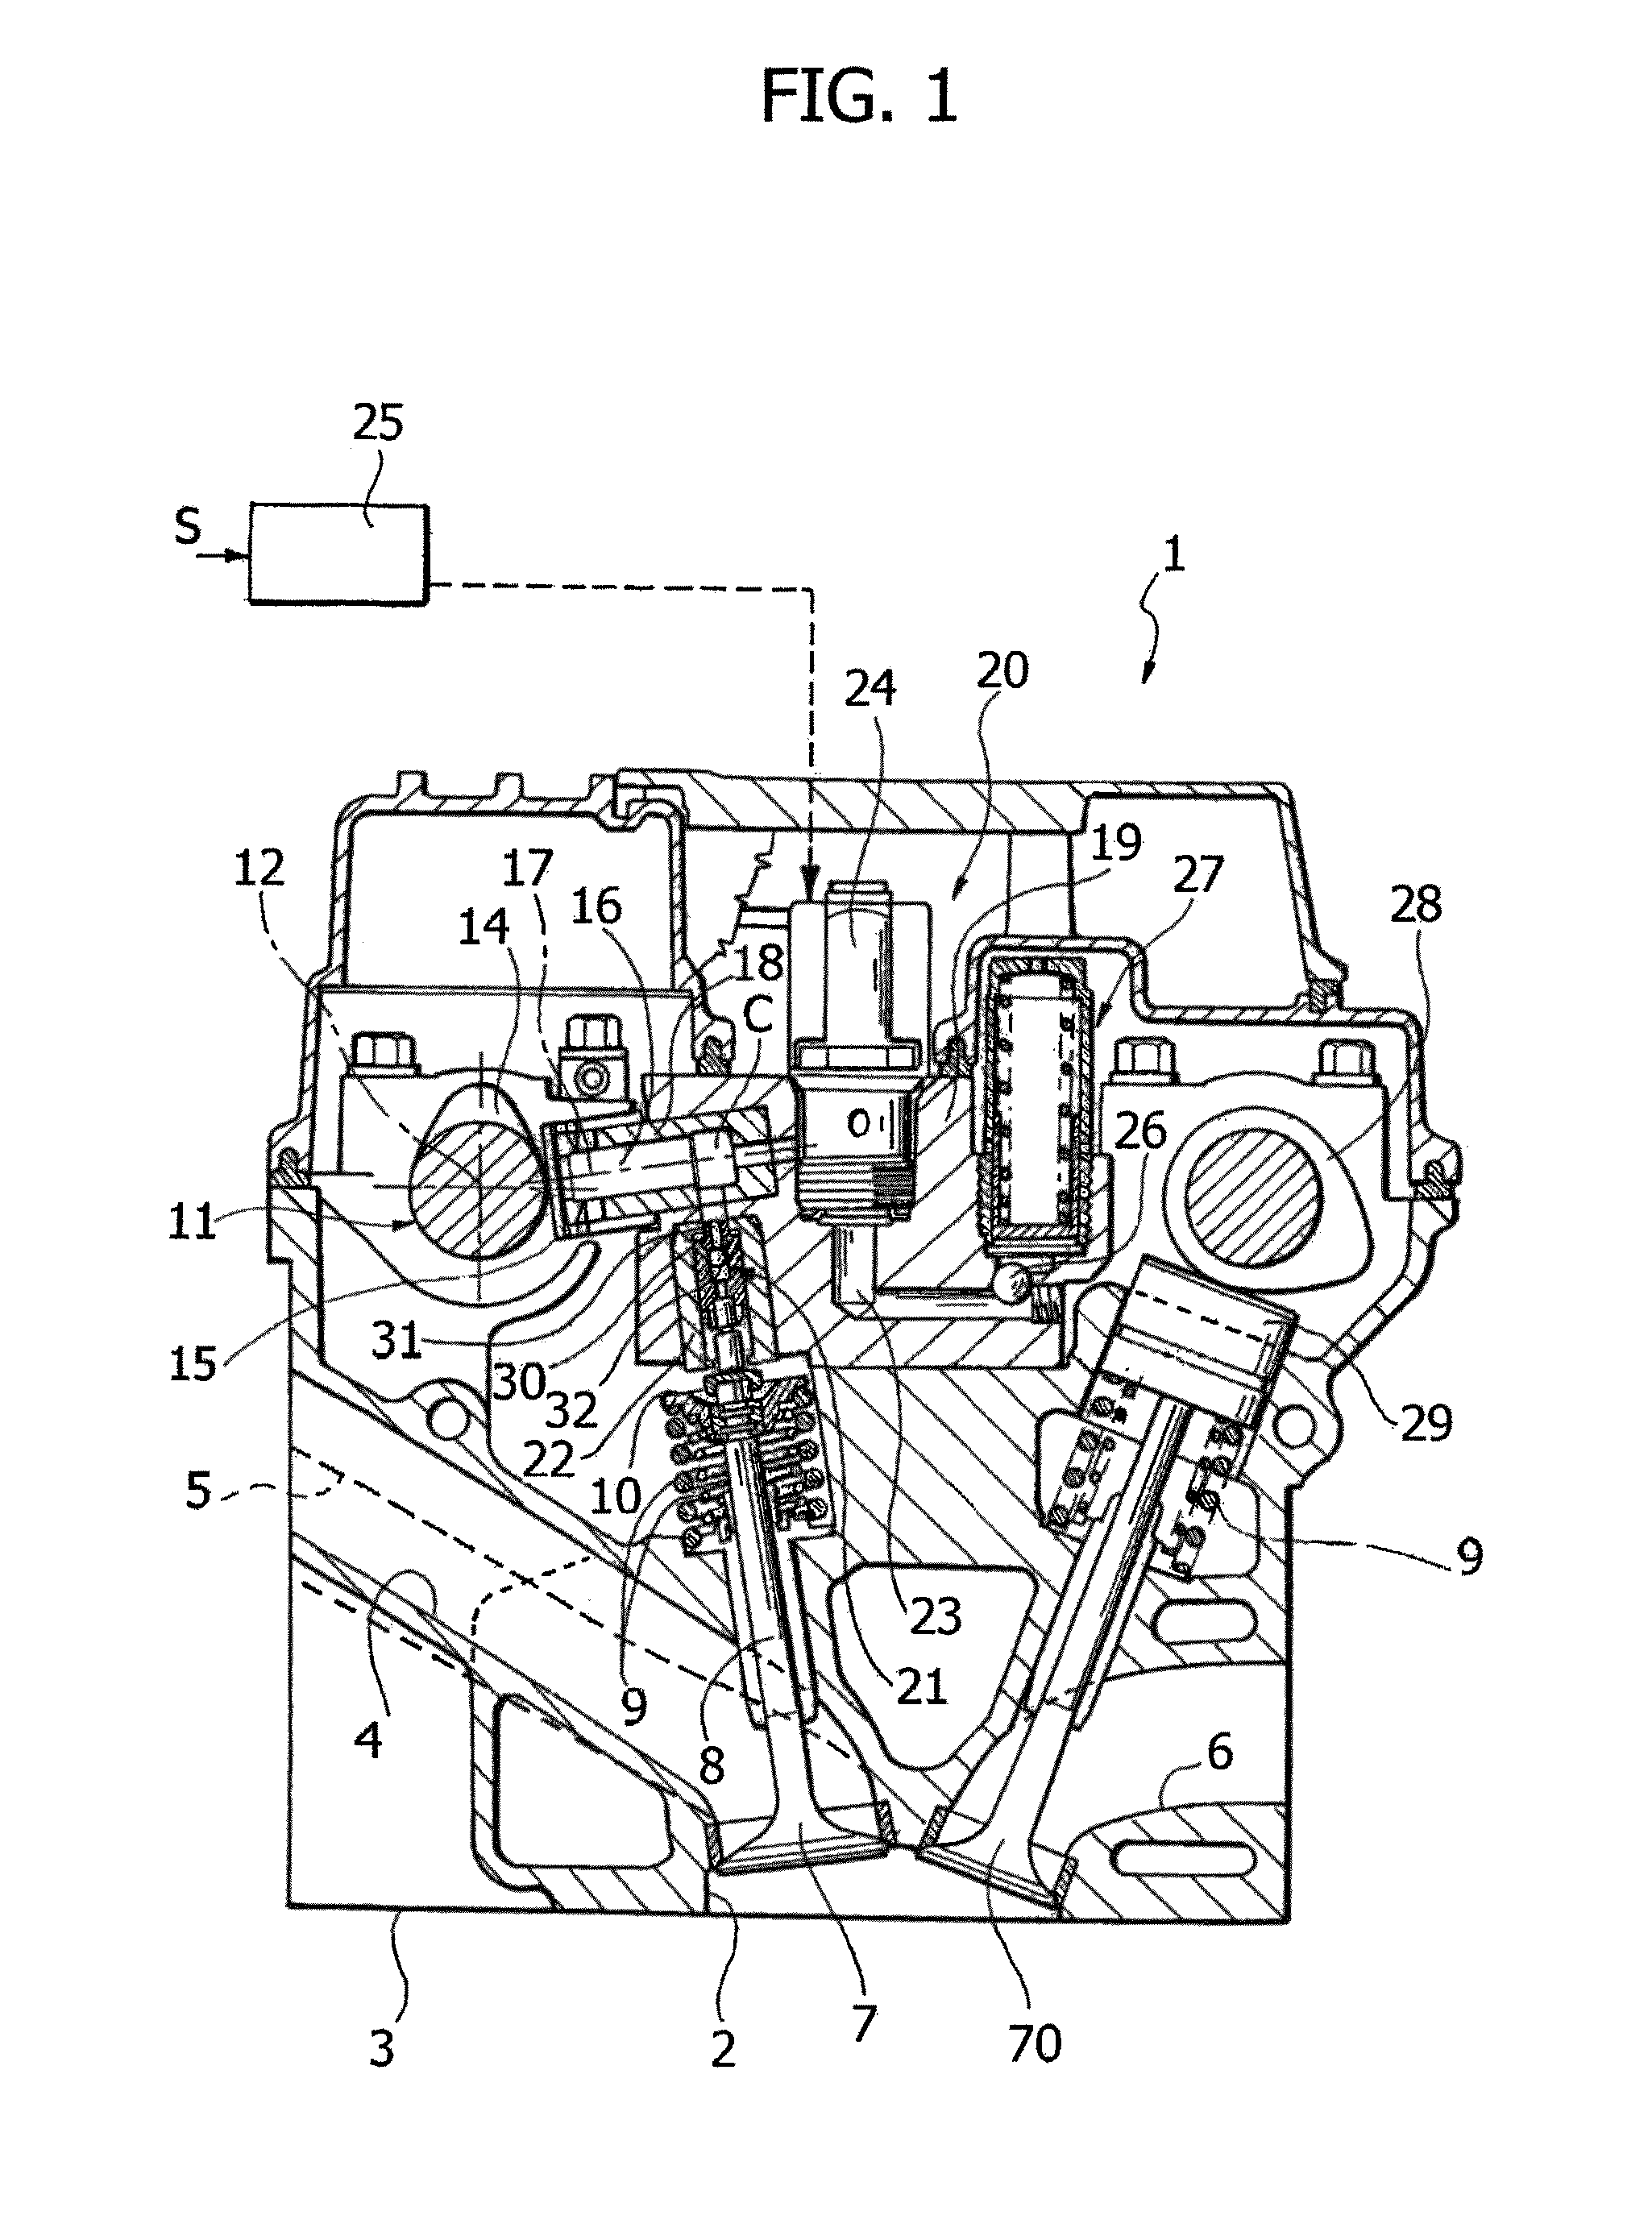 Spark ignition internal combustion engine having intake valves with variable actuation and delayed closure